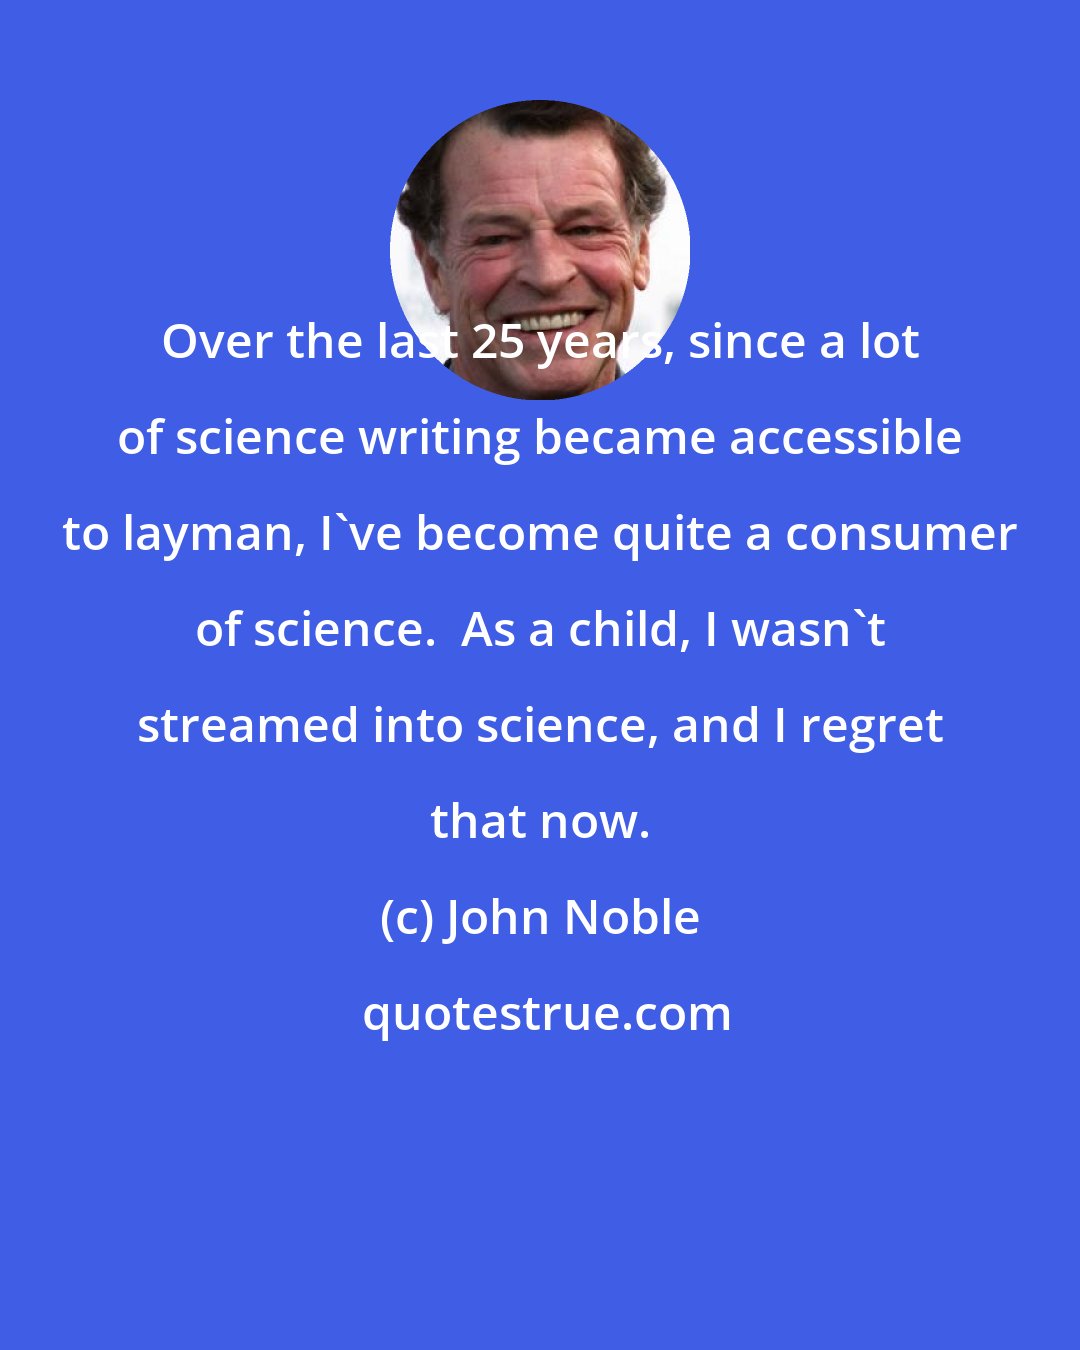 John Noble: Over the last 25 years, since a lot of science writing became accessible to layman, I've become quite a consumer of science.  As a child, I wasn't streamed into science, and I regret that now.